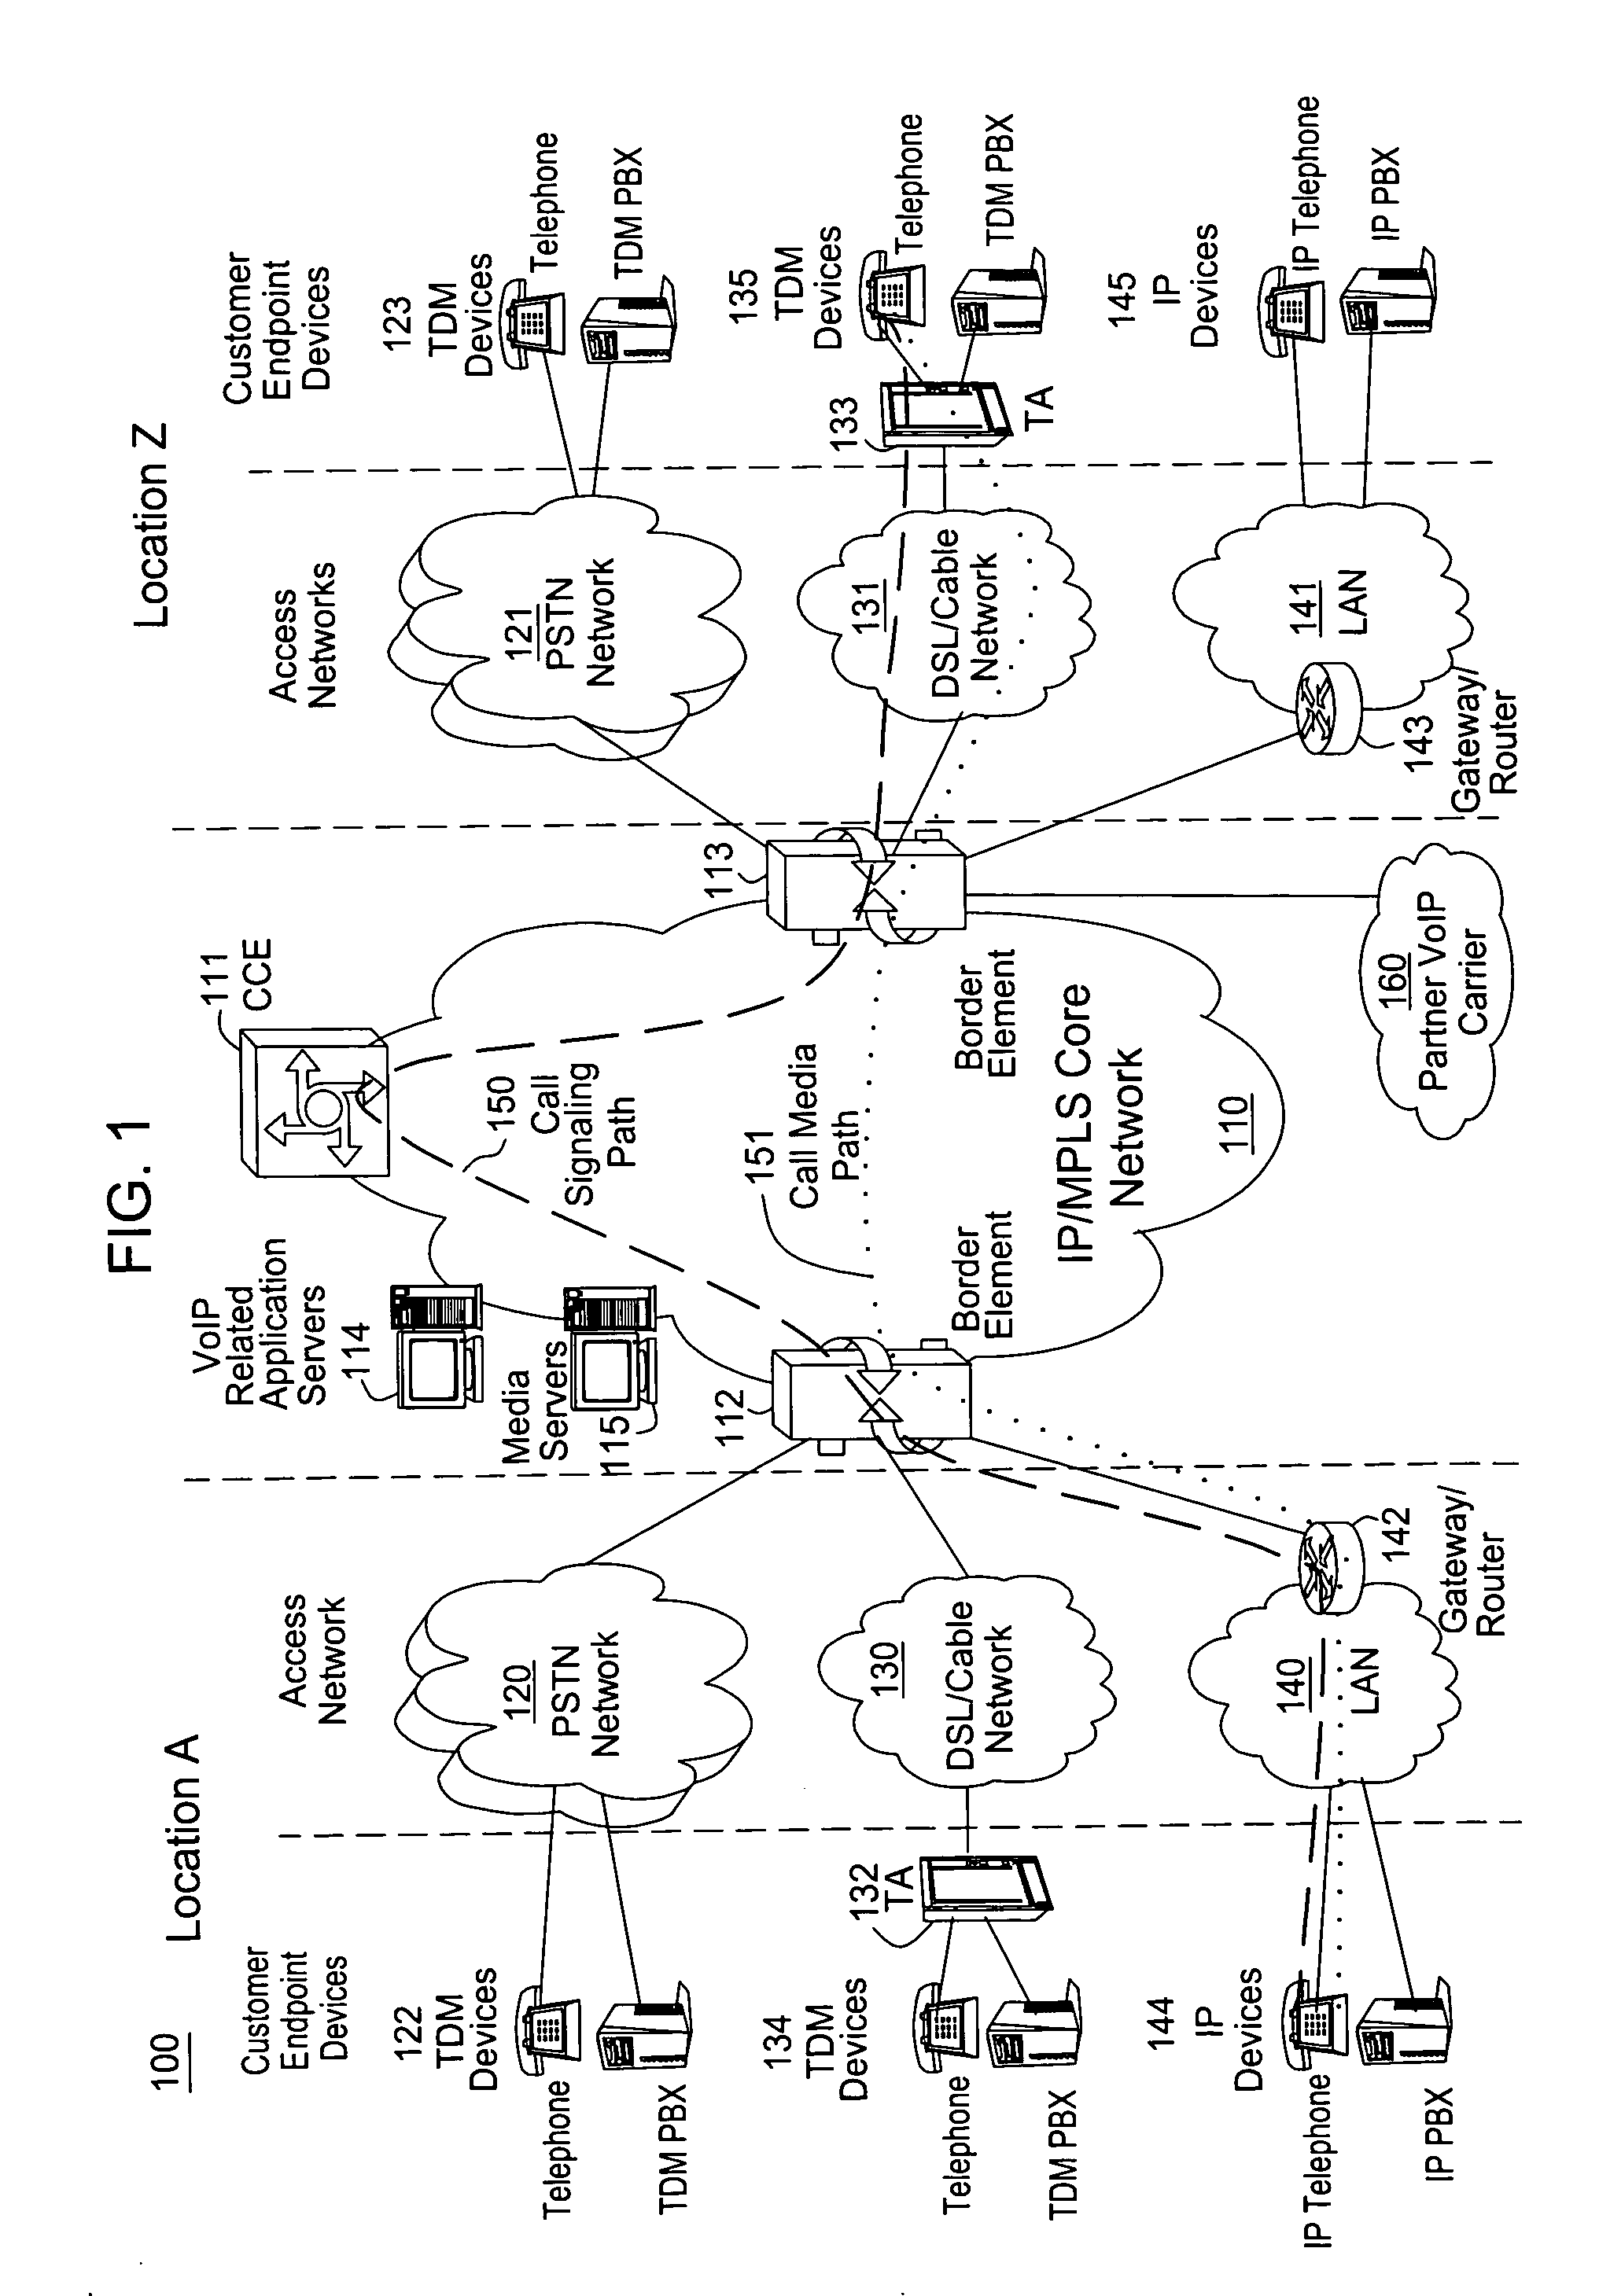 Method and apparatus for evaluating component costs in a communication network